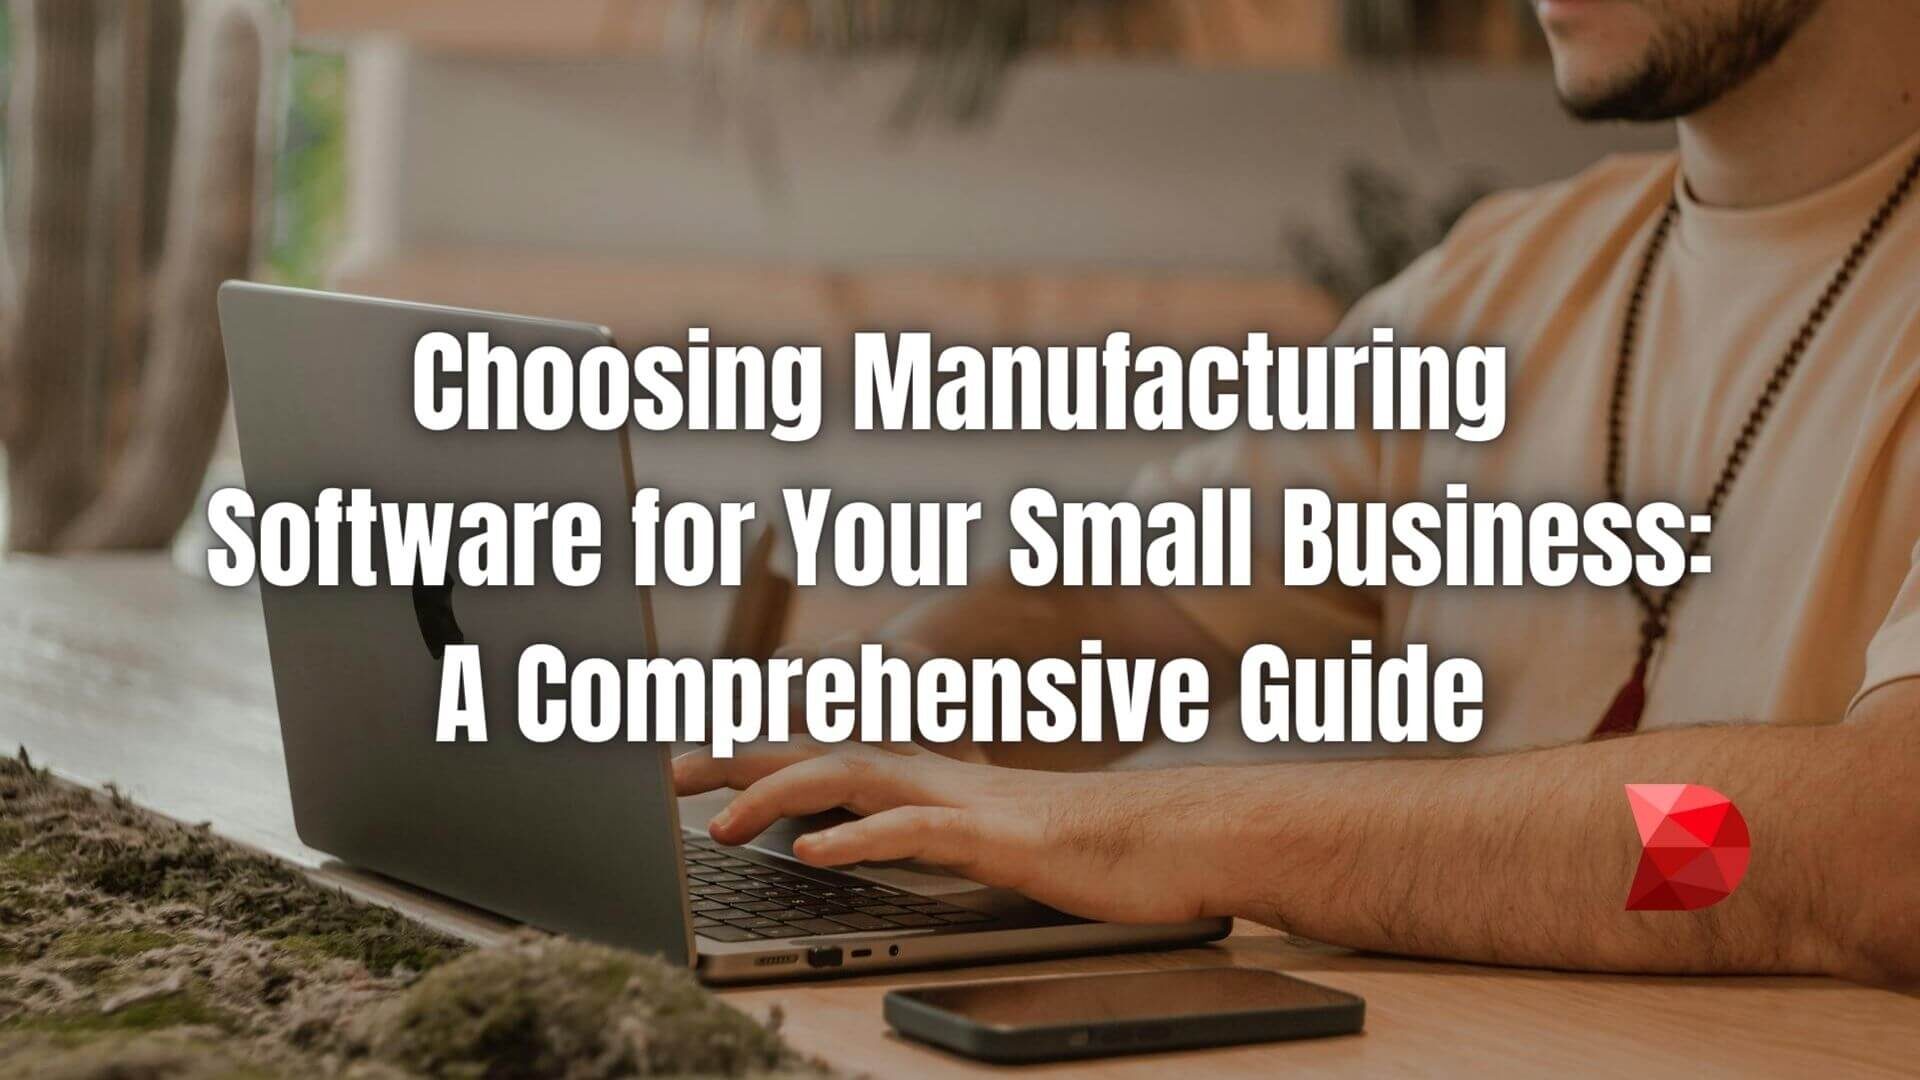 Gain a competitive edge in the manufacturing industry. Click here to discover the best manufacturing software options for your small business.